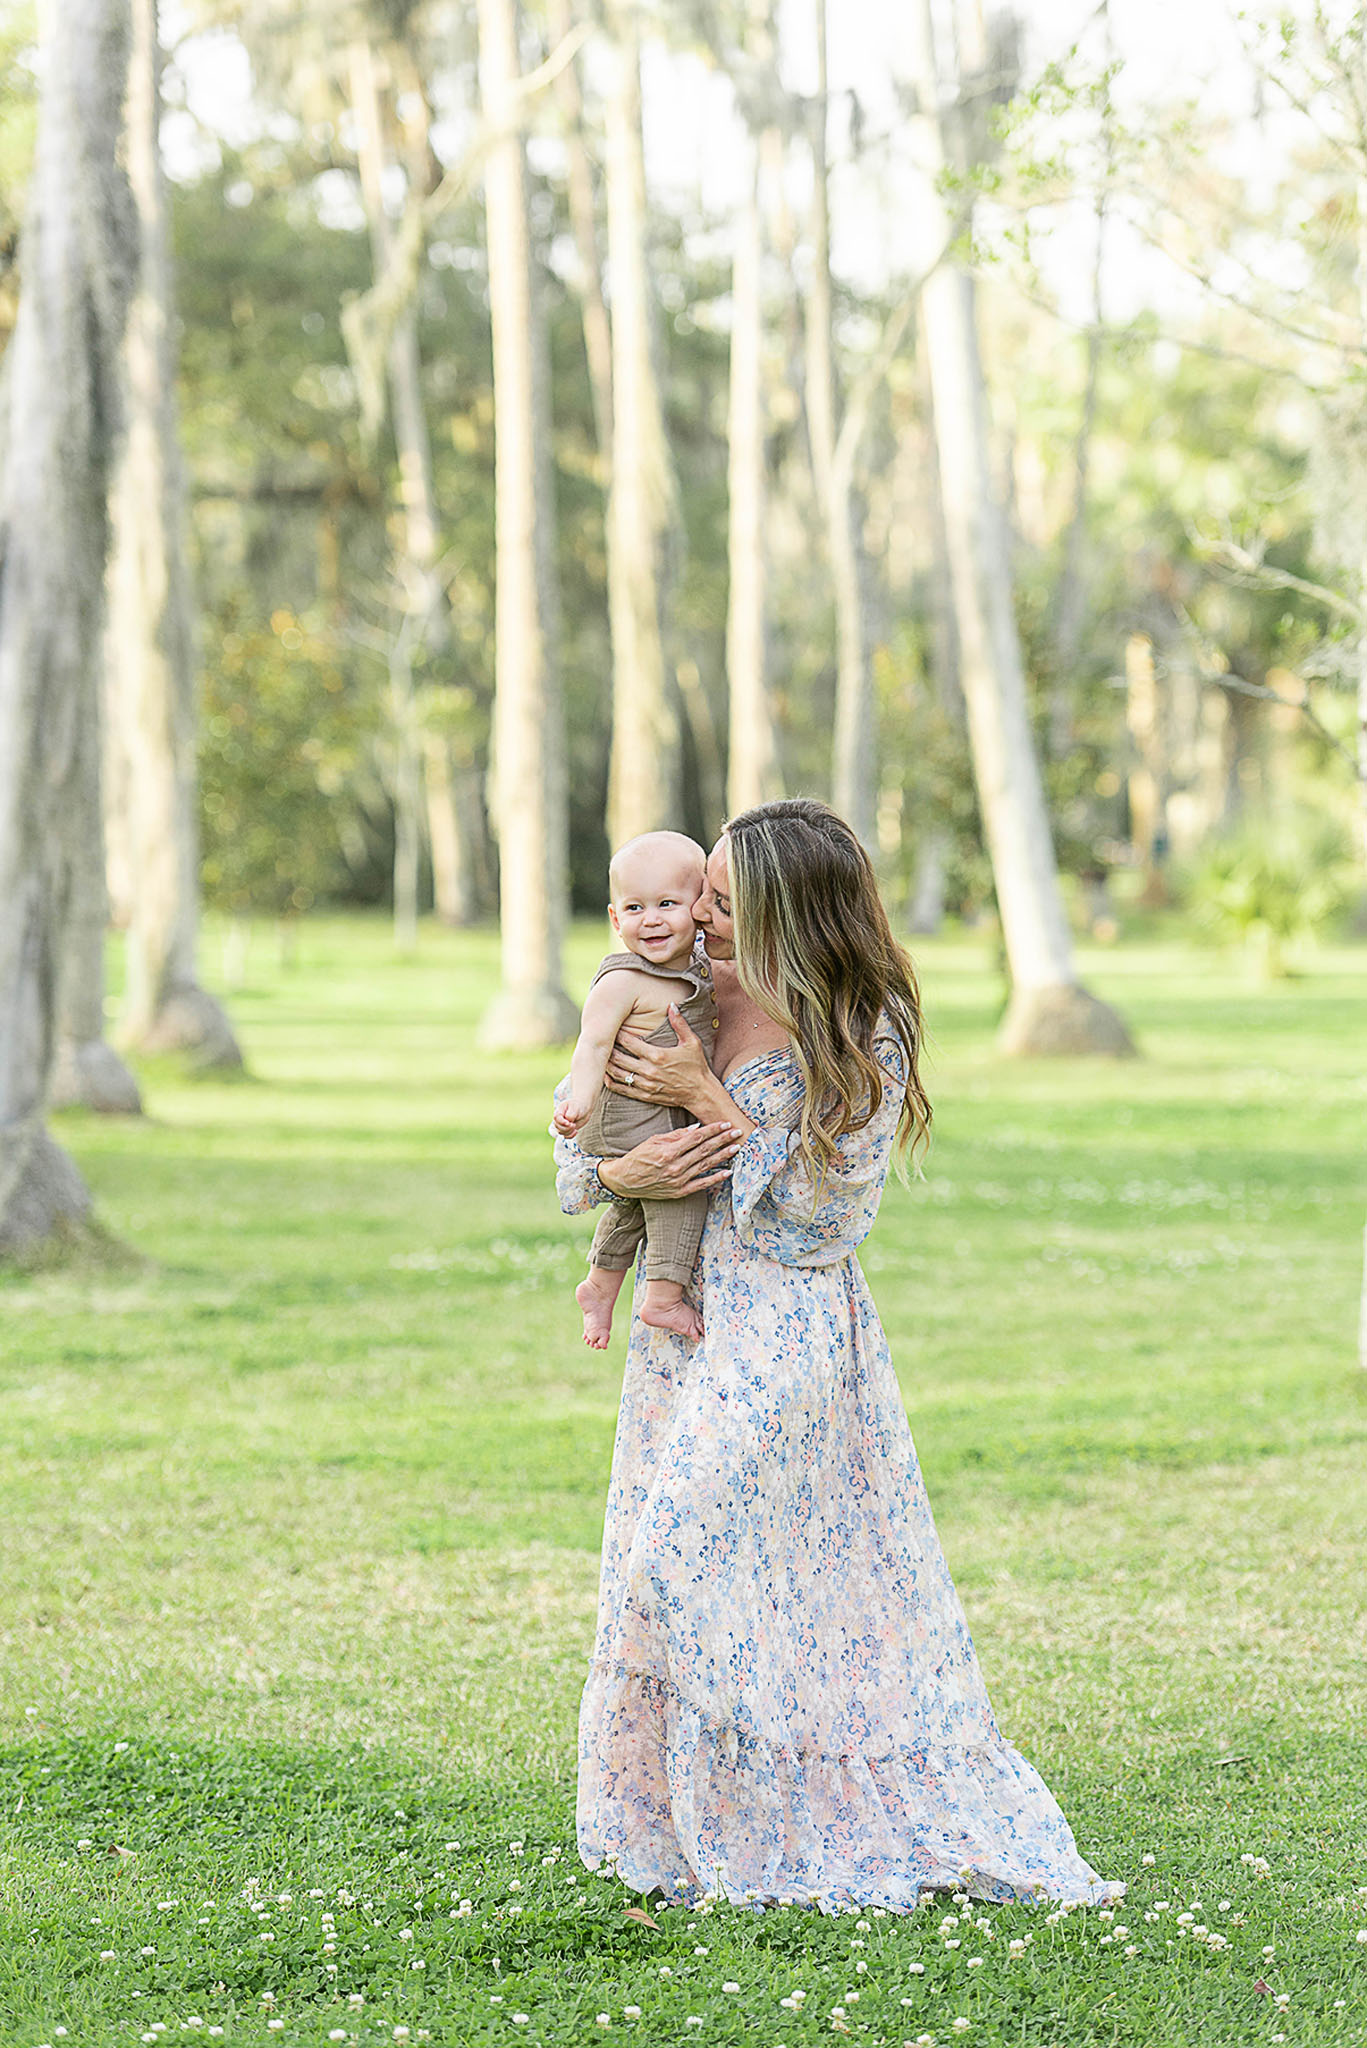 A mother walks through a park in a long floral dress with her toddler son